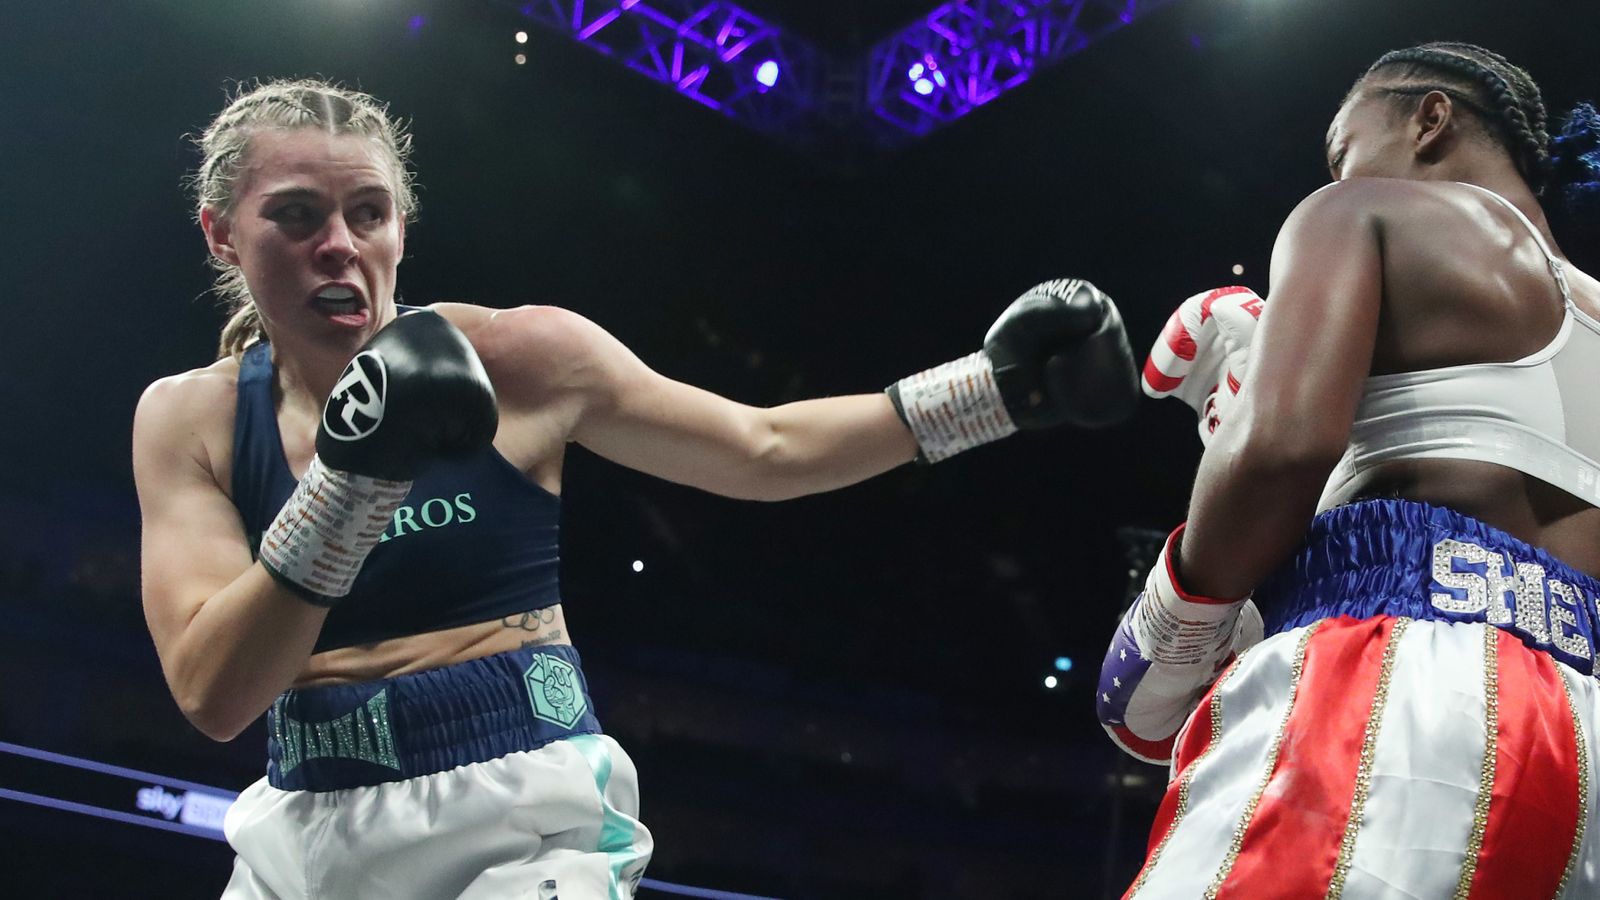 Savannah Marshall knows she could do better in a Claressa Shields rematch, says promoter Ben Shalom